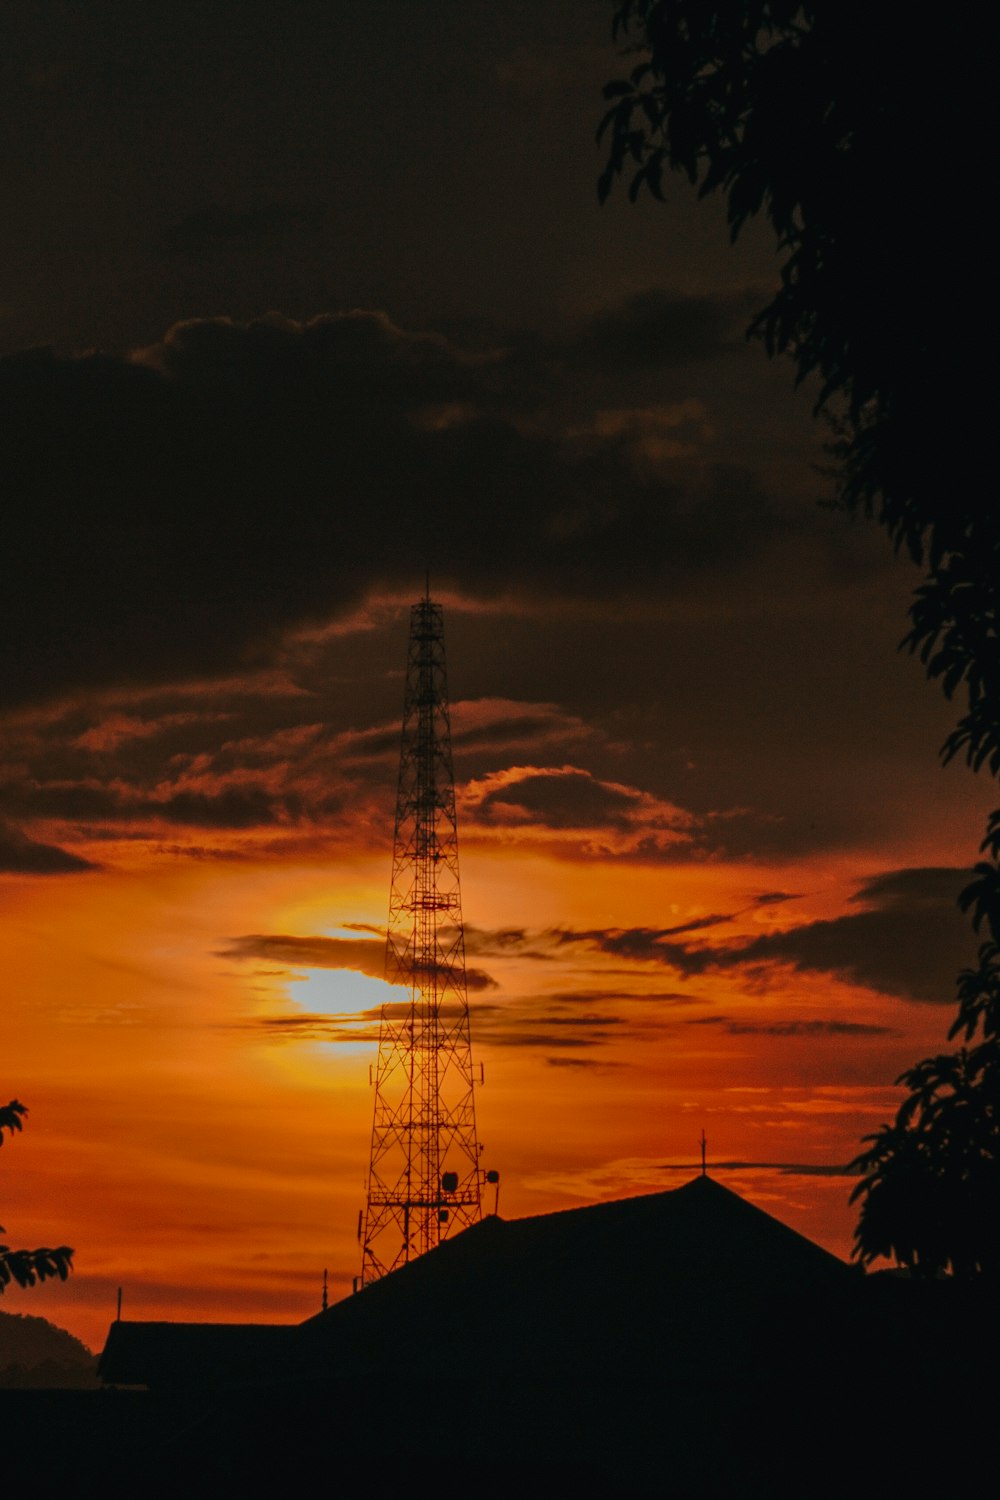 the sun is setting behind a radio tower